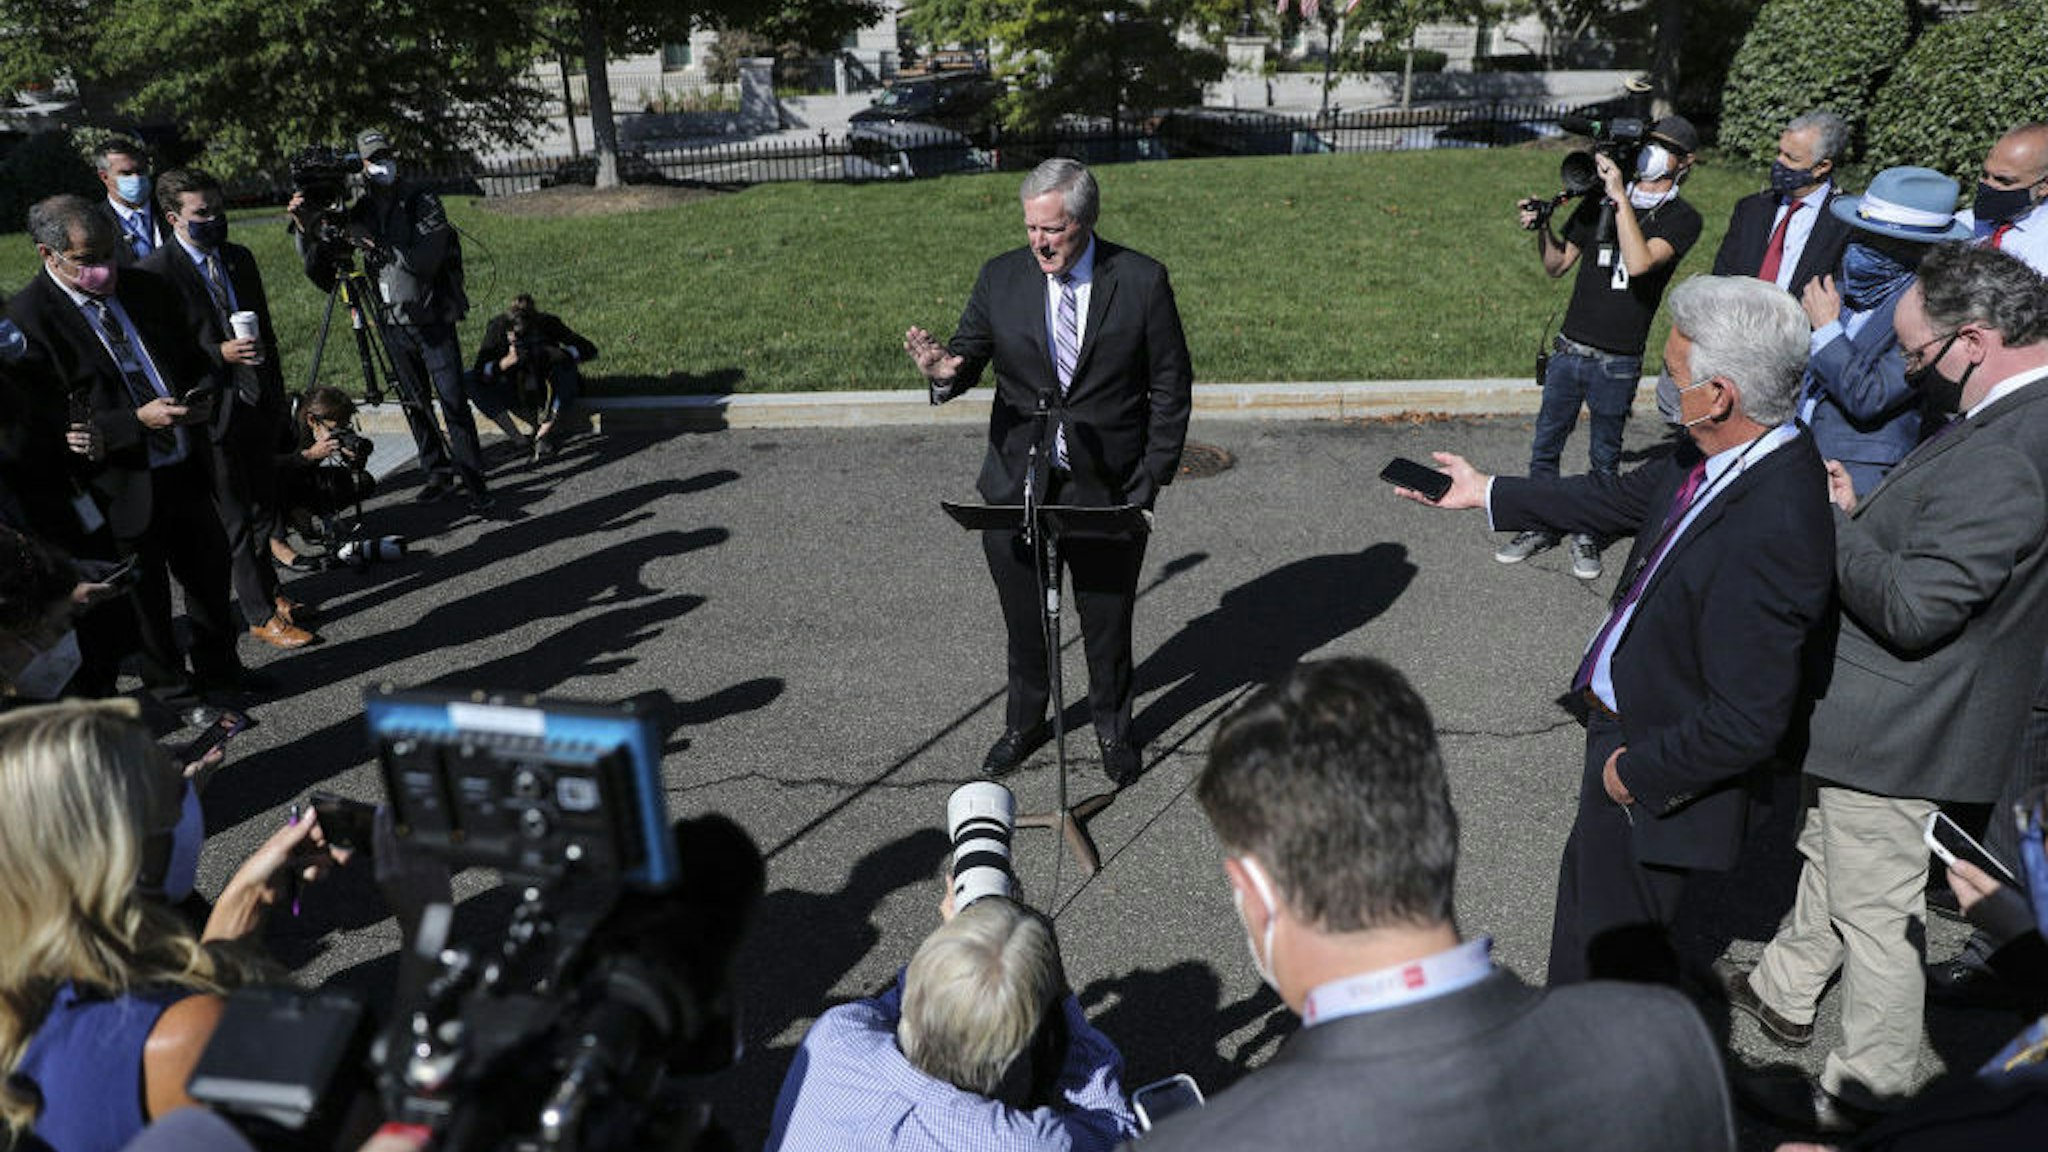 Mark Meadows, White House chief of staff, speaks with members of the media outside the West Wing of the White House in Washington, D.C., U.S., on Friday, Oct. 2, 2020. President Trump is experiencing mild symptoms and will remain on the job, Meadows told reporters. Photographer: Oliver Contreras/Bloomberg